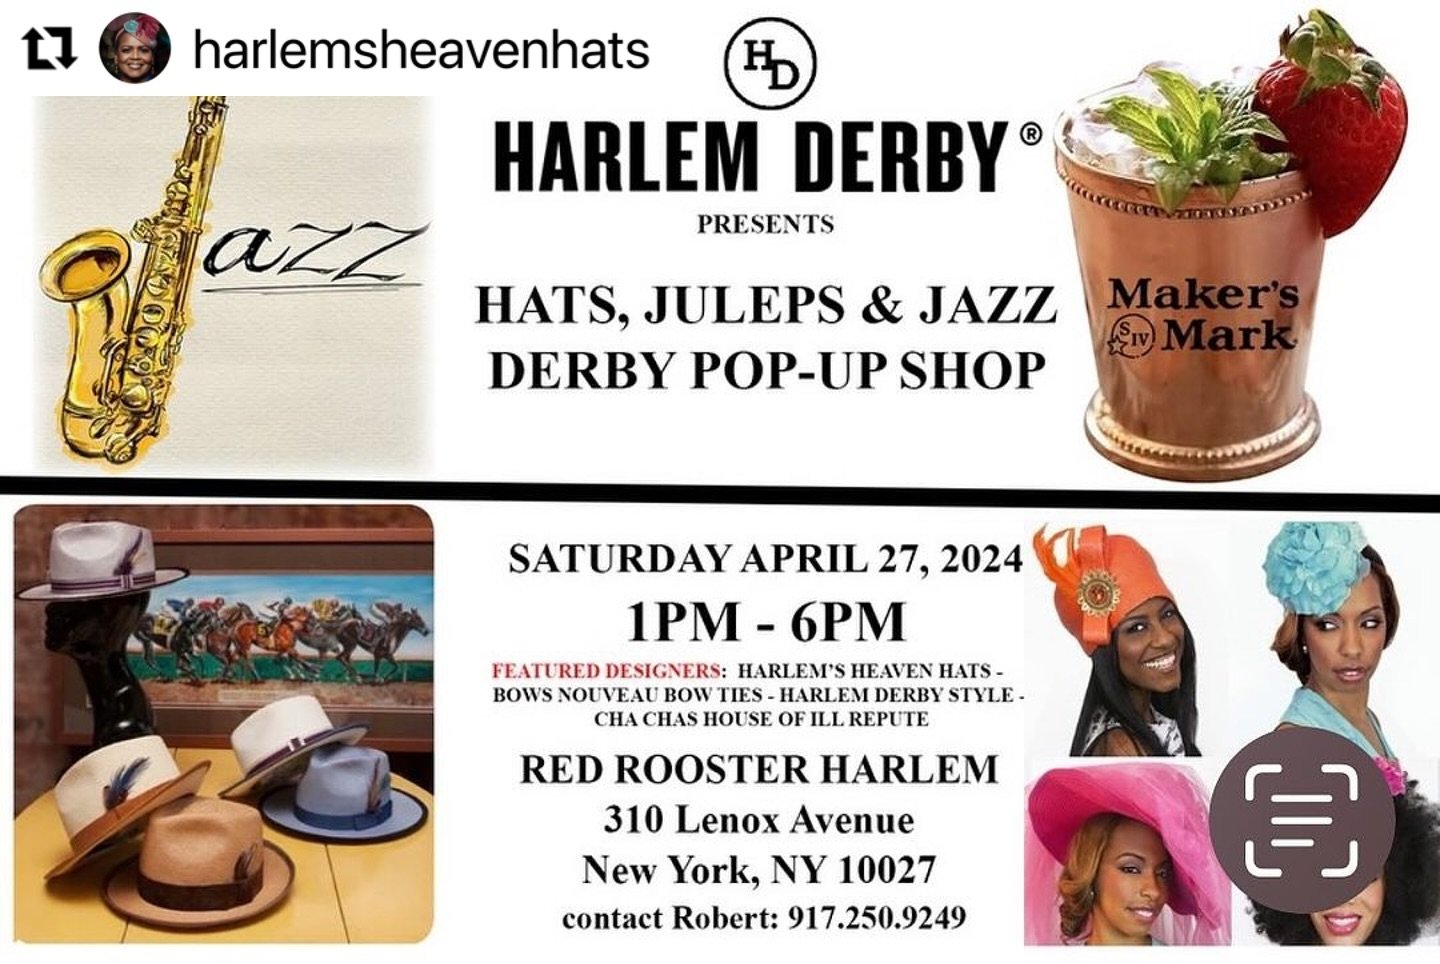 #Repost @harlemsheavenhats 
・・・
Come out to RED ROOSTER in Harlem tomorrow for our PRE-DERBY POP UP SHOP.  SHOP AND SIP MINT JULEPS with Live Jazz Music.  THIS IS A FREE EVENT !! &ldquo;In The GOLD ROOM&rdquo;  #harlemsheavenhats @milliners_guild @ha